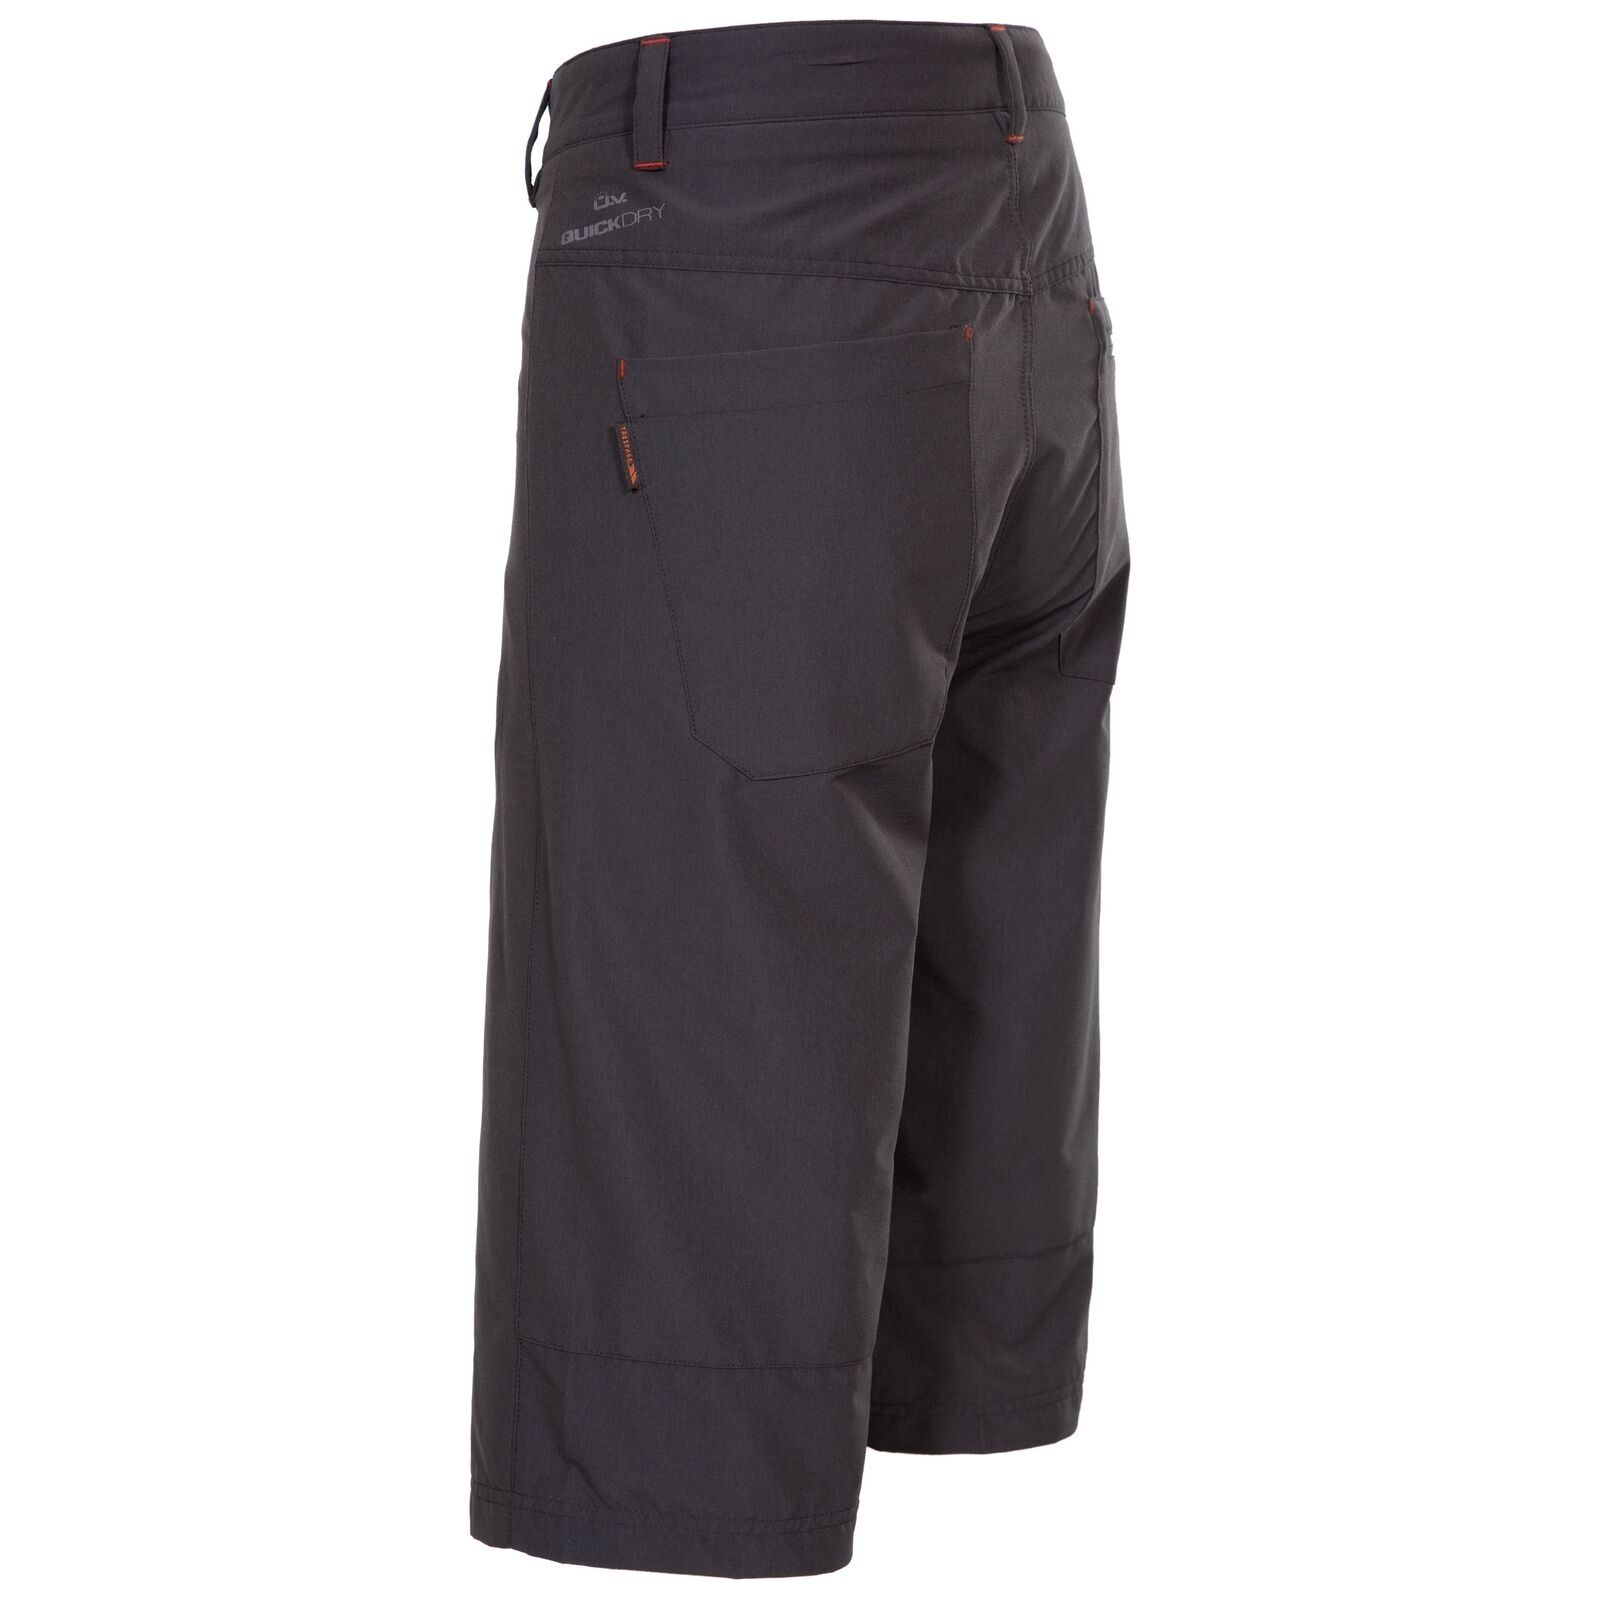 Flat waist with belt loops. Front fly opening. Long short, below the knee. Knee darts. 4 zip pockets. UV 40+. Comfort stretch. Quick dry. 95% Polyamide, 5% Elastane. Trespass Mens Waist Sizing (approx): S - 32in/81cm, M - 34in/86cm, L - 36in/91.5cm, XL - 38in/96.5cm, XXL - 40in/101.5cm, 3XL - 42in/106.5cm.